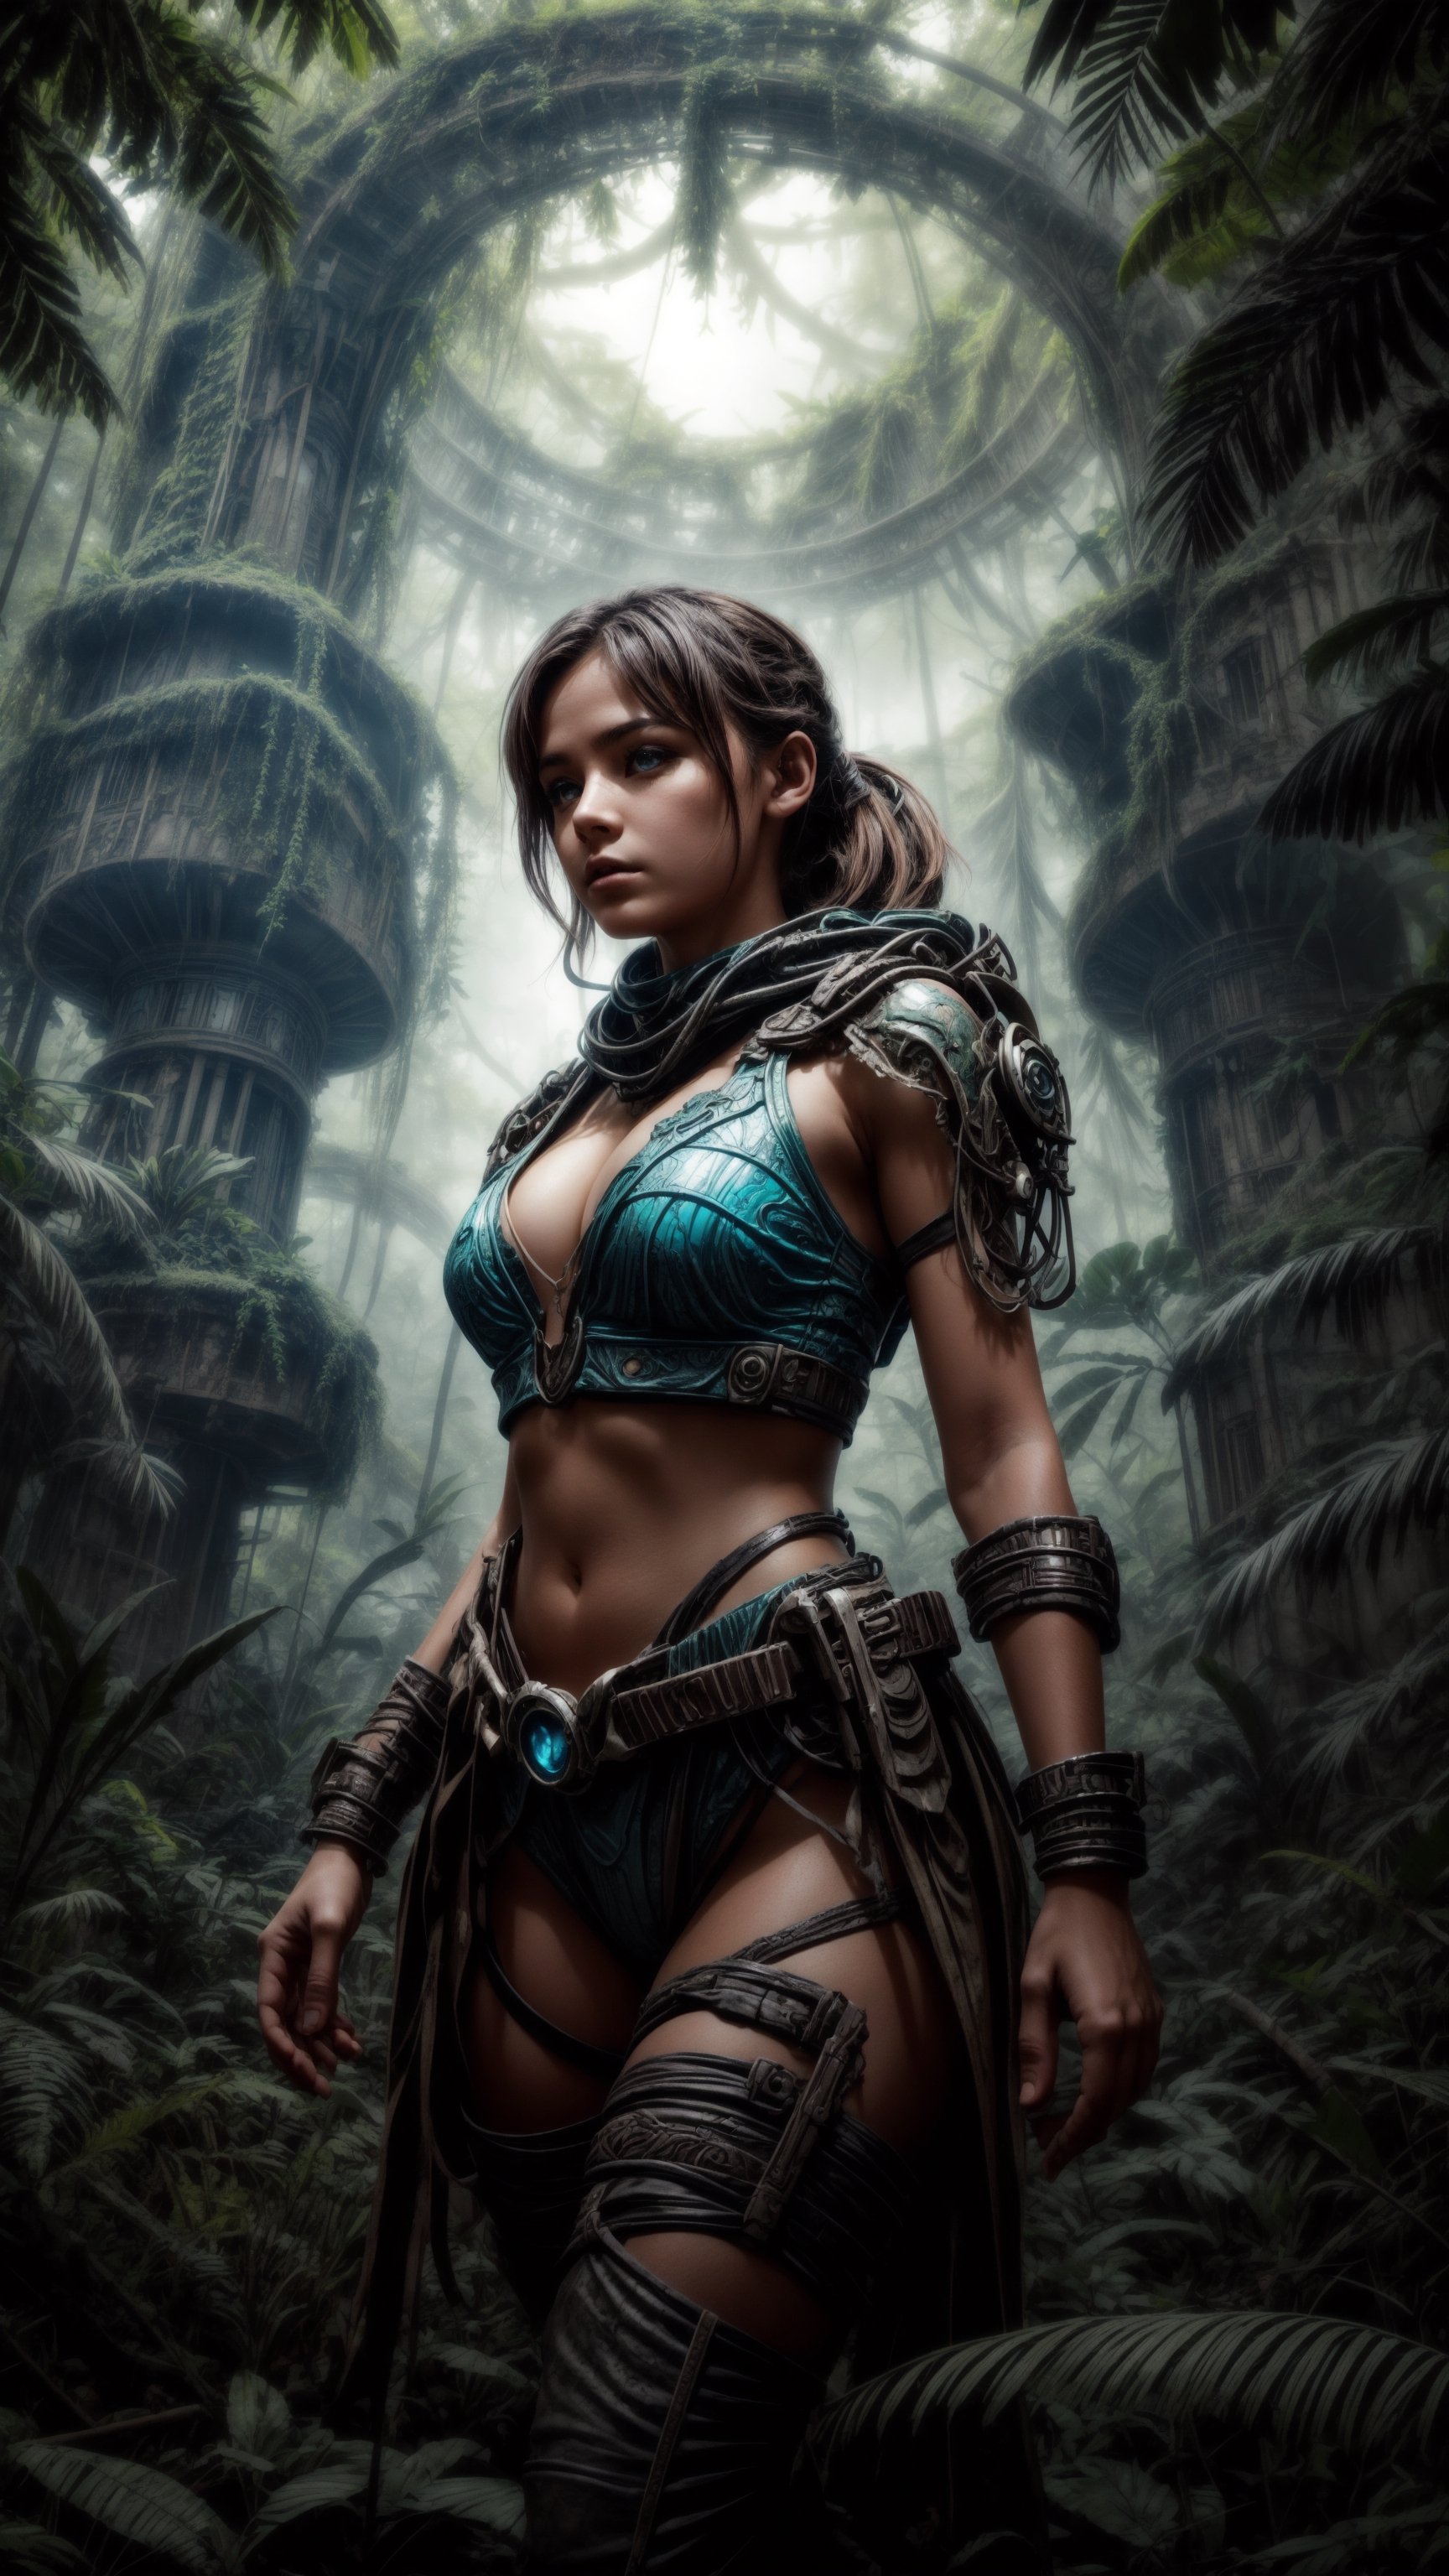 "In the heart of the jungle, amidst the remnants of a bygone era, the Stelar Girl stands amidst the Alien Ruins, her expression a blend of wonder and determination as she contemplates the intersection of Science Fiction and reality, the swirling clouds overhead a symbol of the turbulent journey that lies ahead."